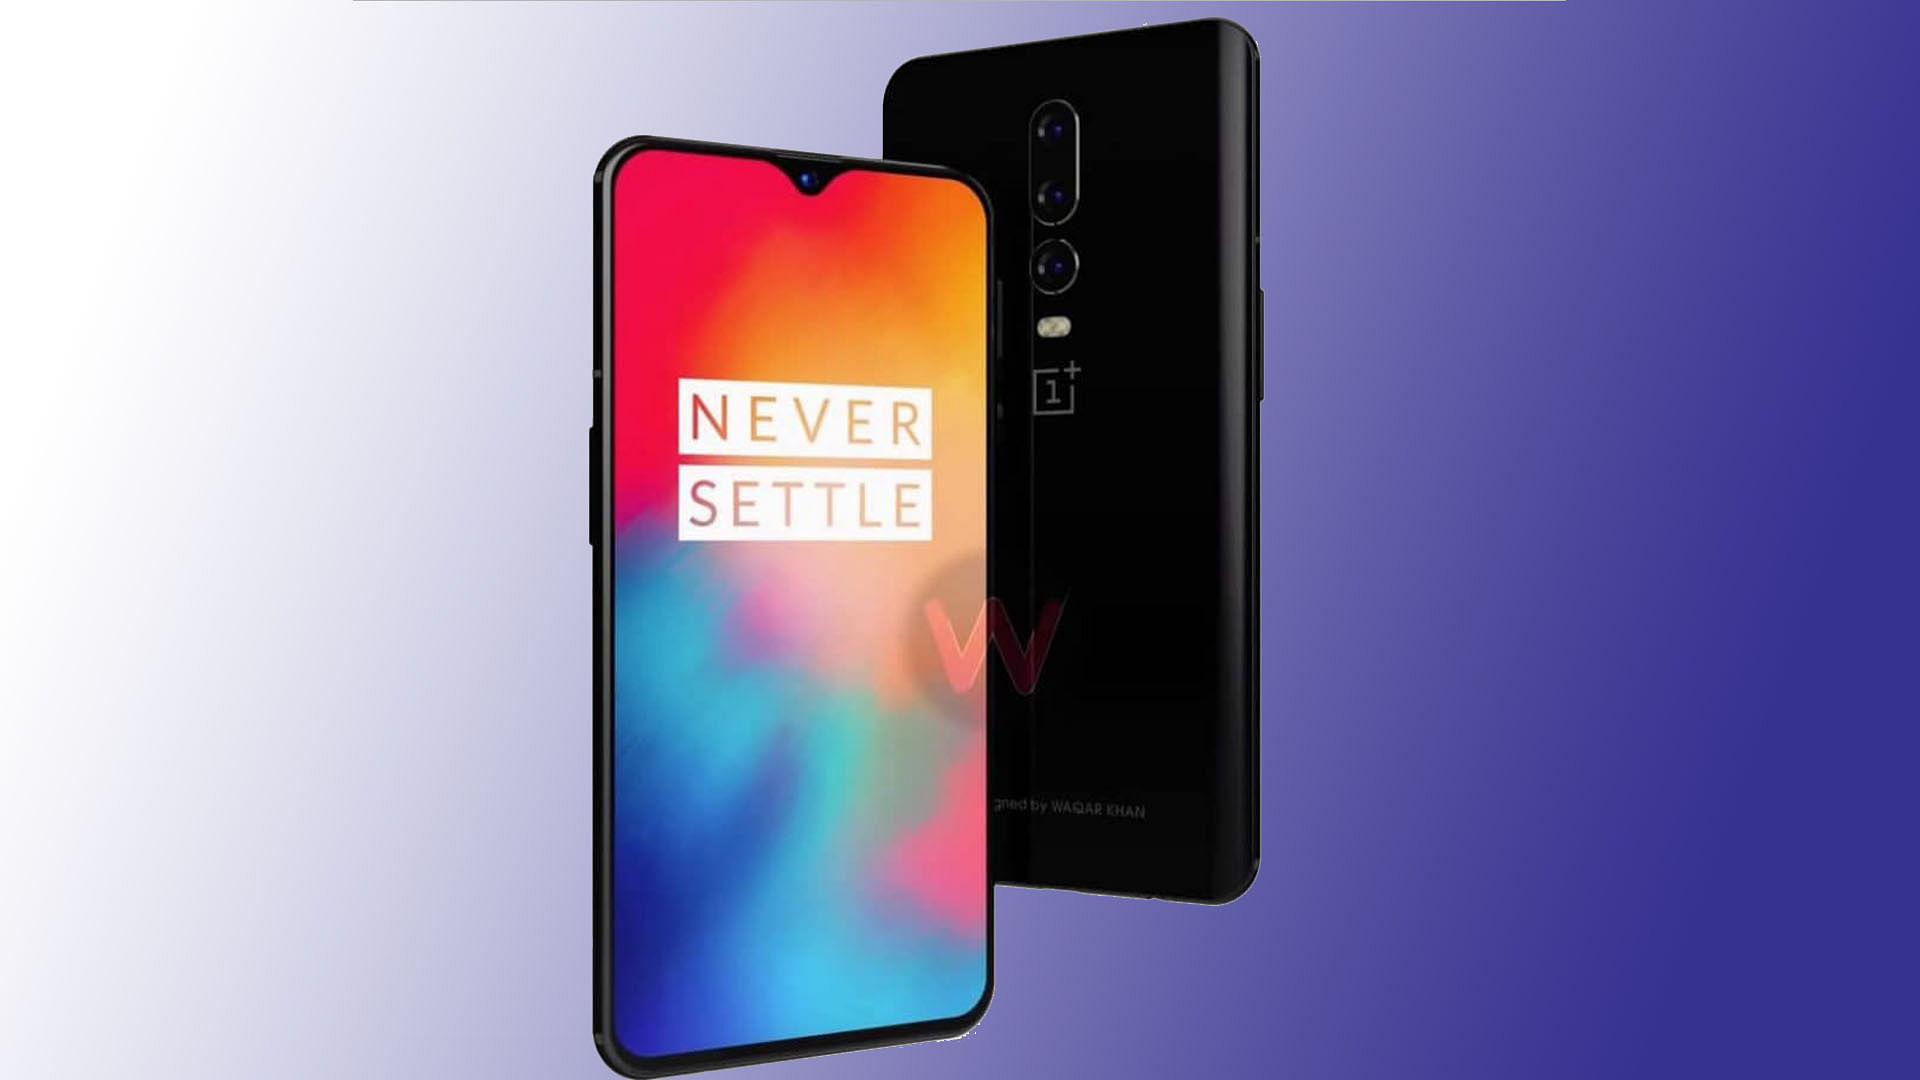 This could be the official OnePlus 6T design.